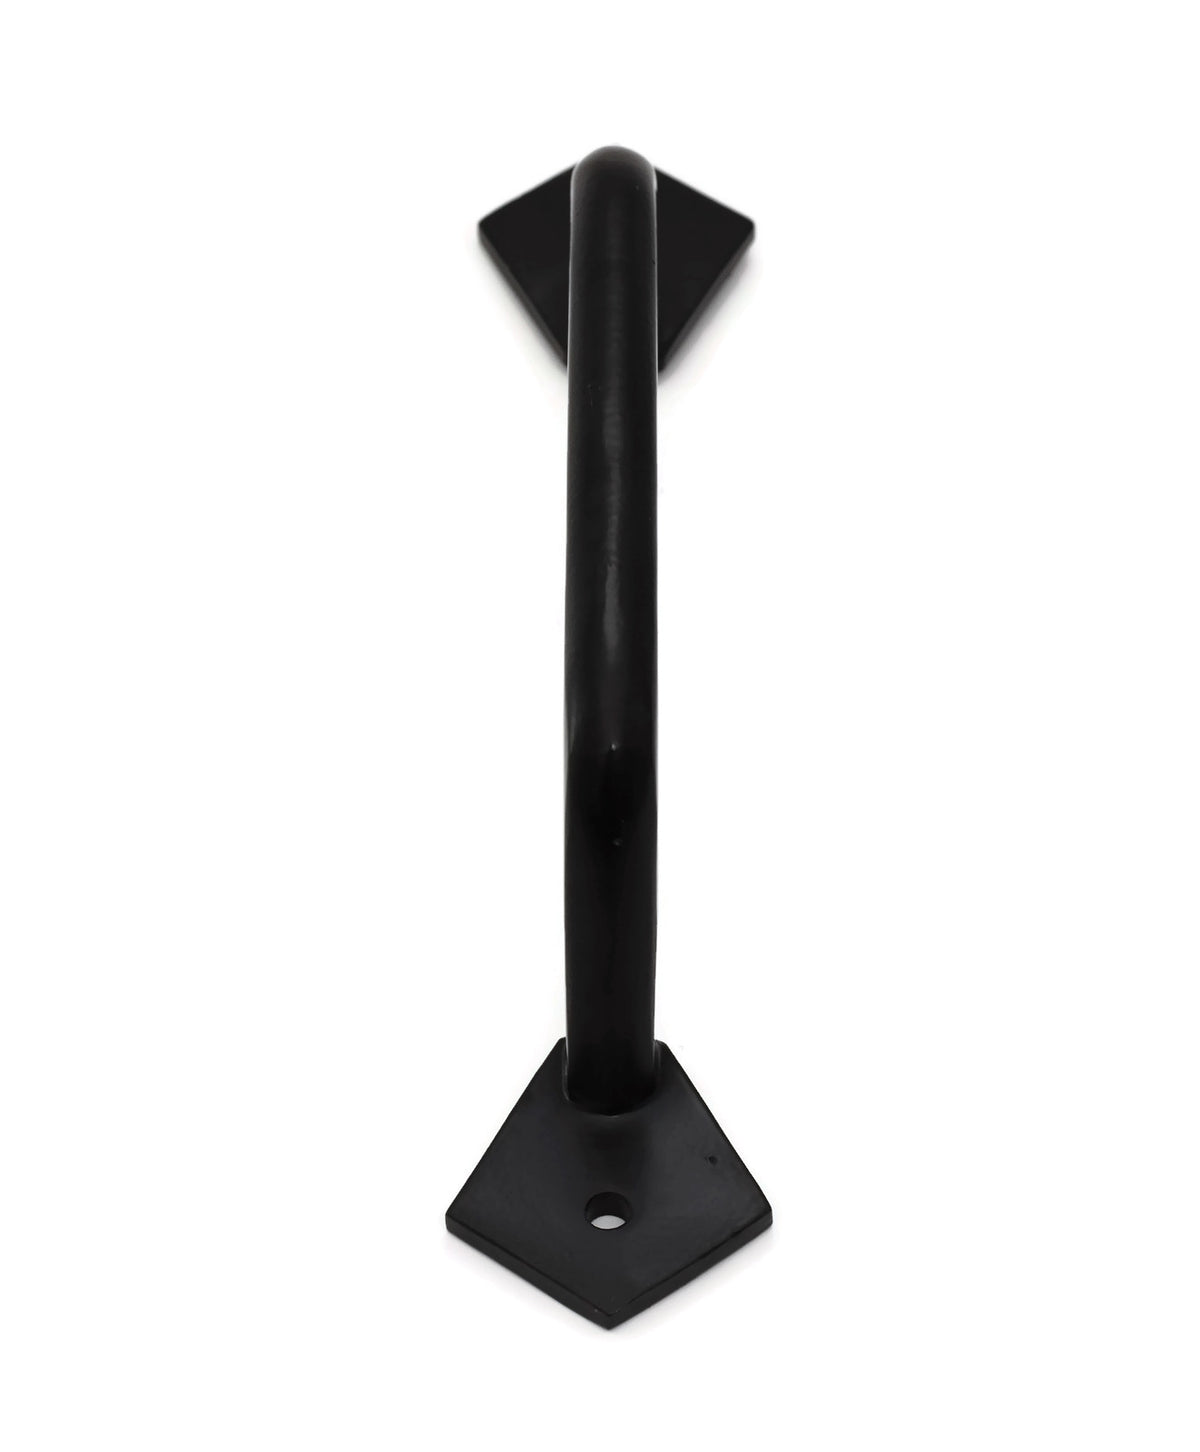 Iron Grab Pull Handle for Doors - Round Black Bar - For Barns, Gates, and more